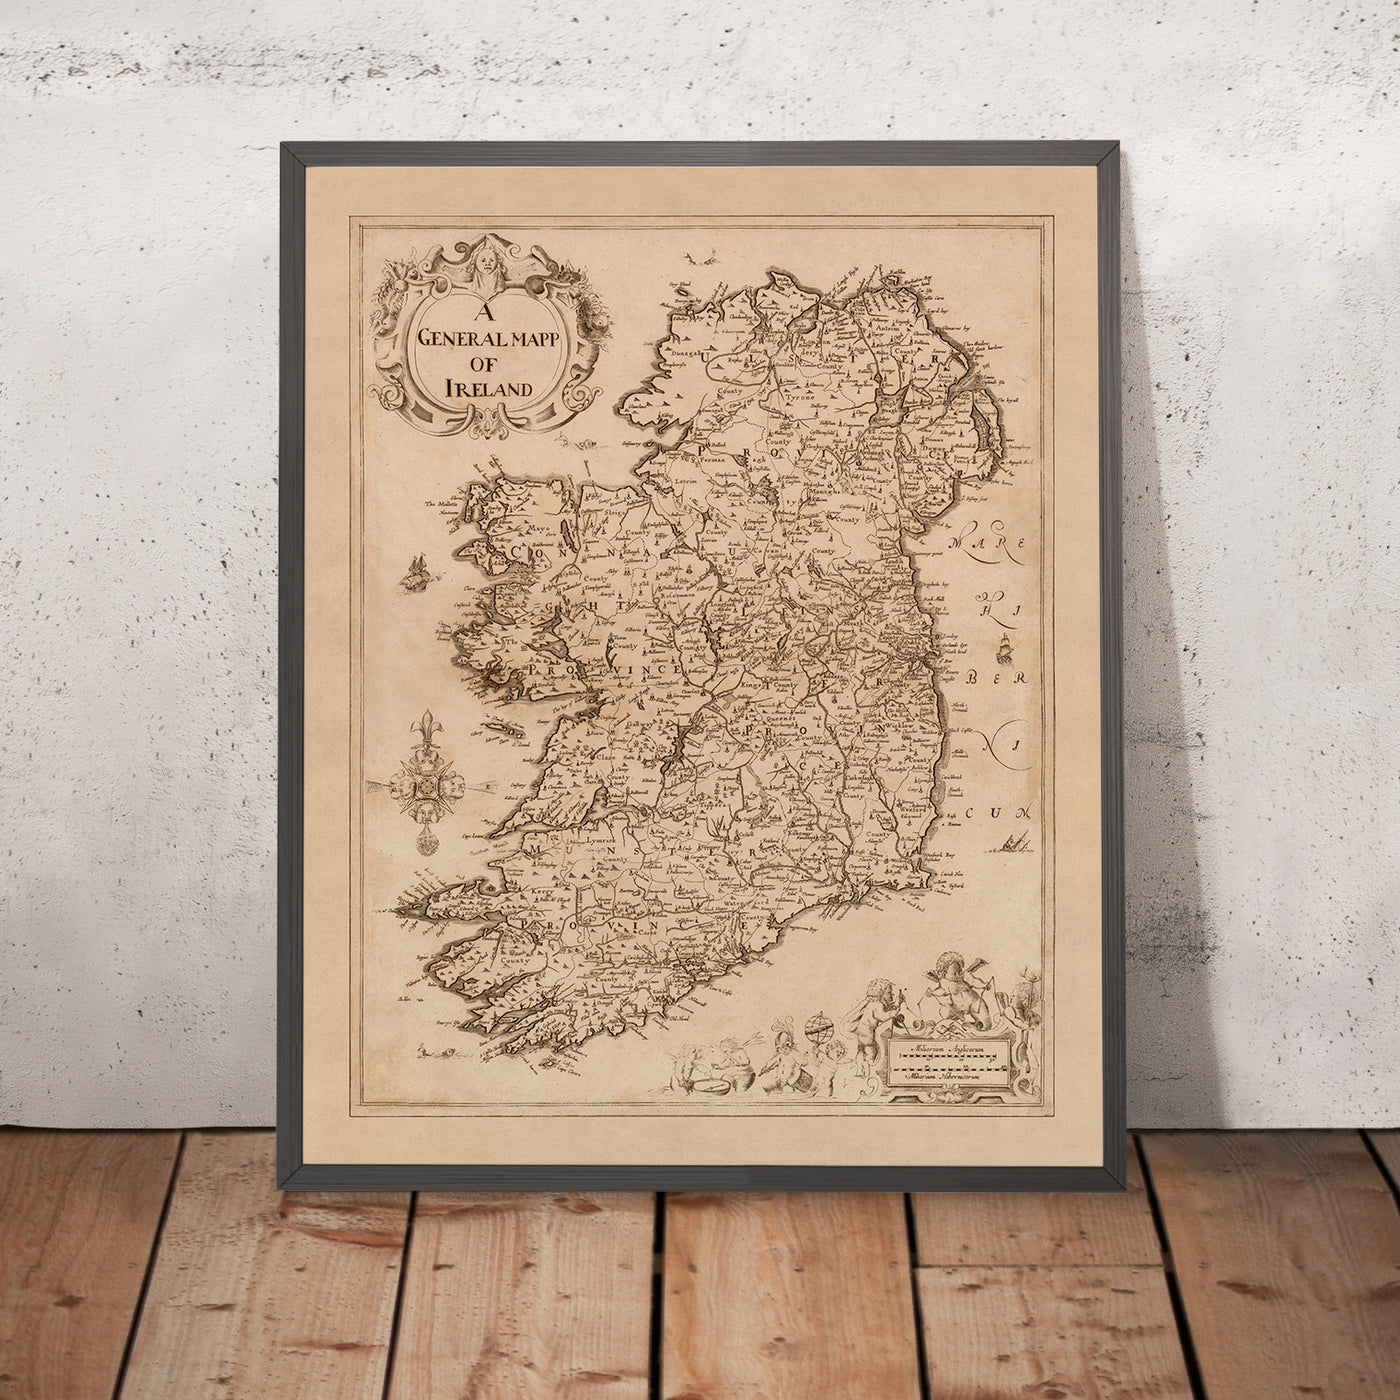 Rare Old Map of Ireland by Sir William Petty, 1685: Dublin, Cork, Limerick, Galway, Waterford